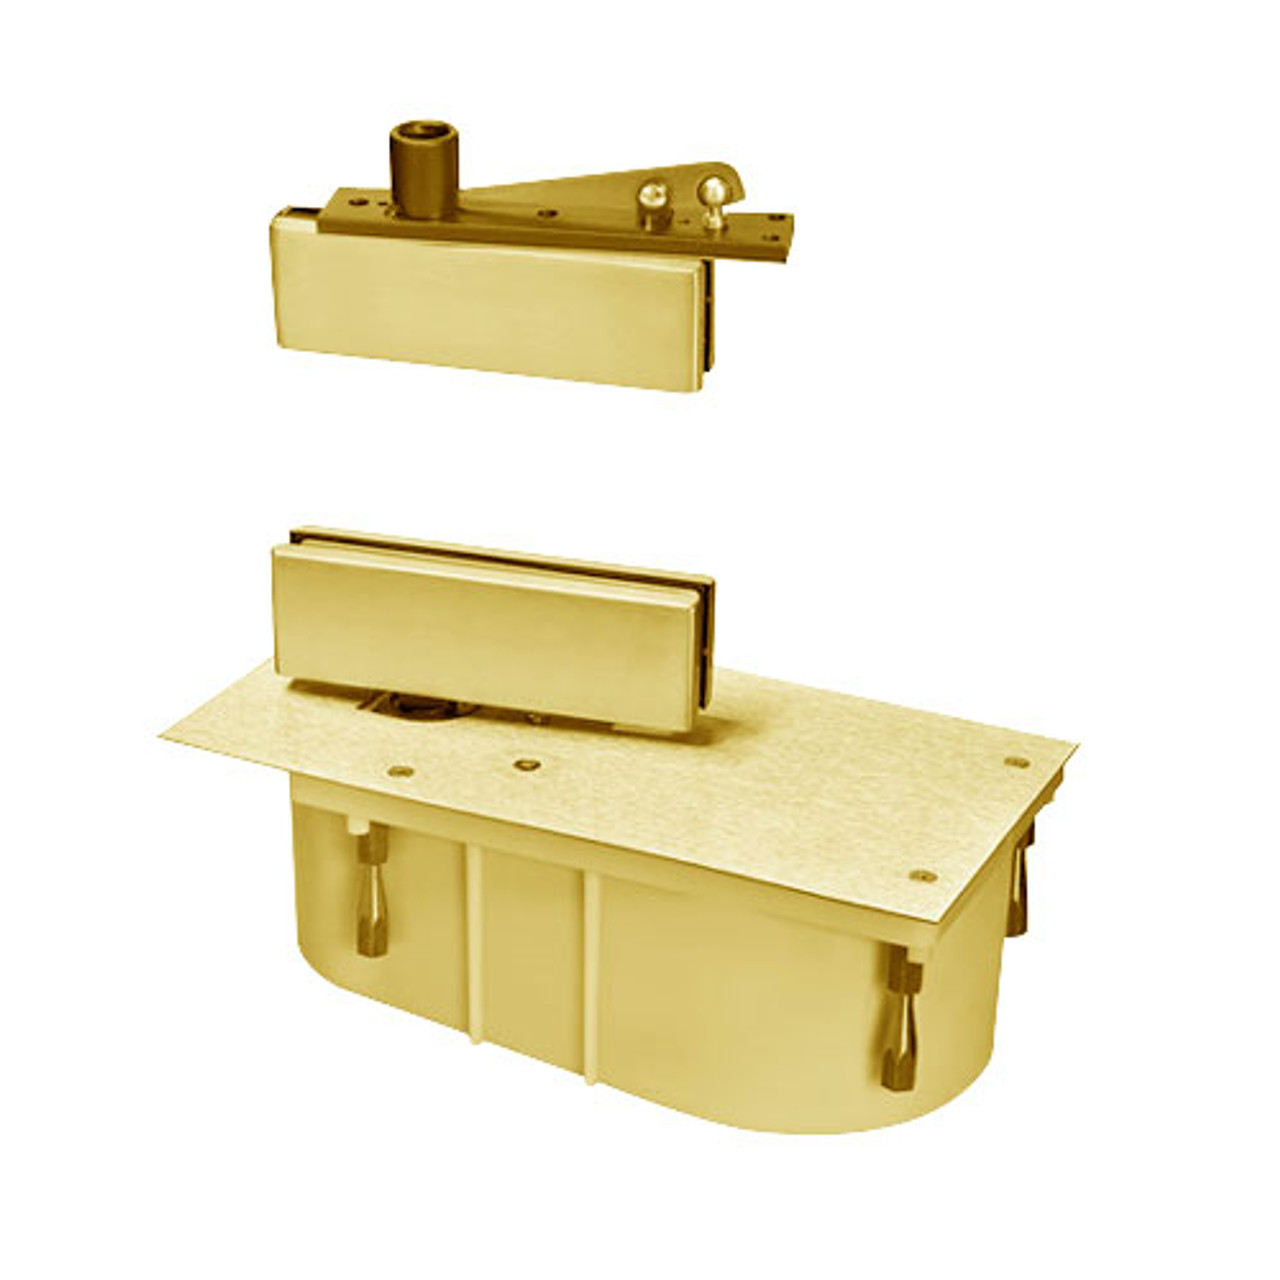 428-85S-LTP-RH-605 Rixson 428 Series Heavy Duty Single Acting Center Hung Floor Closer with Patch Fittings in Bright Brass Finish